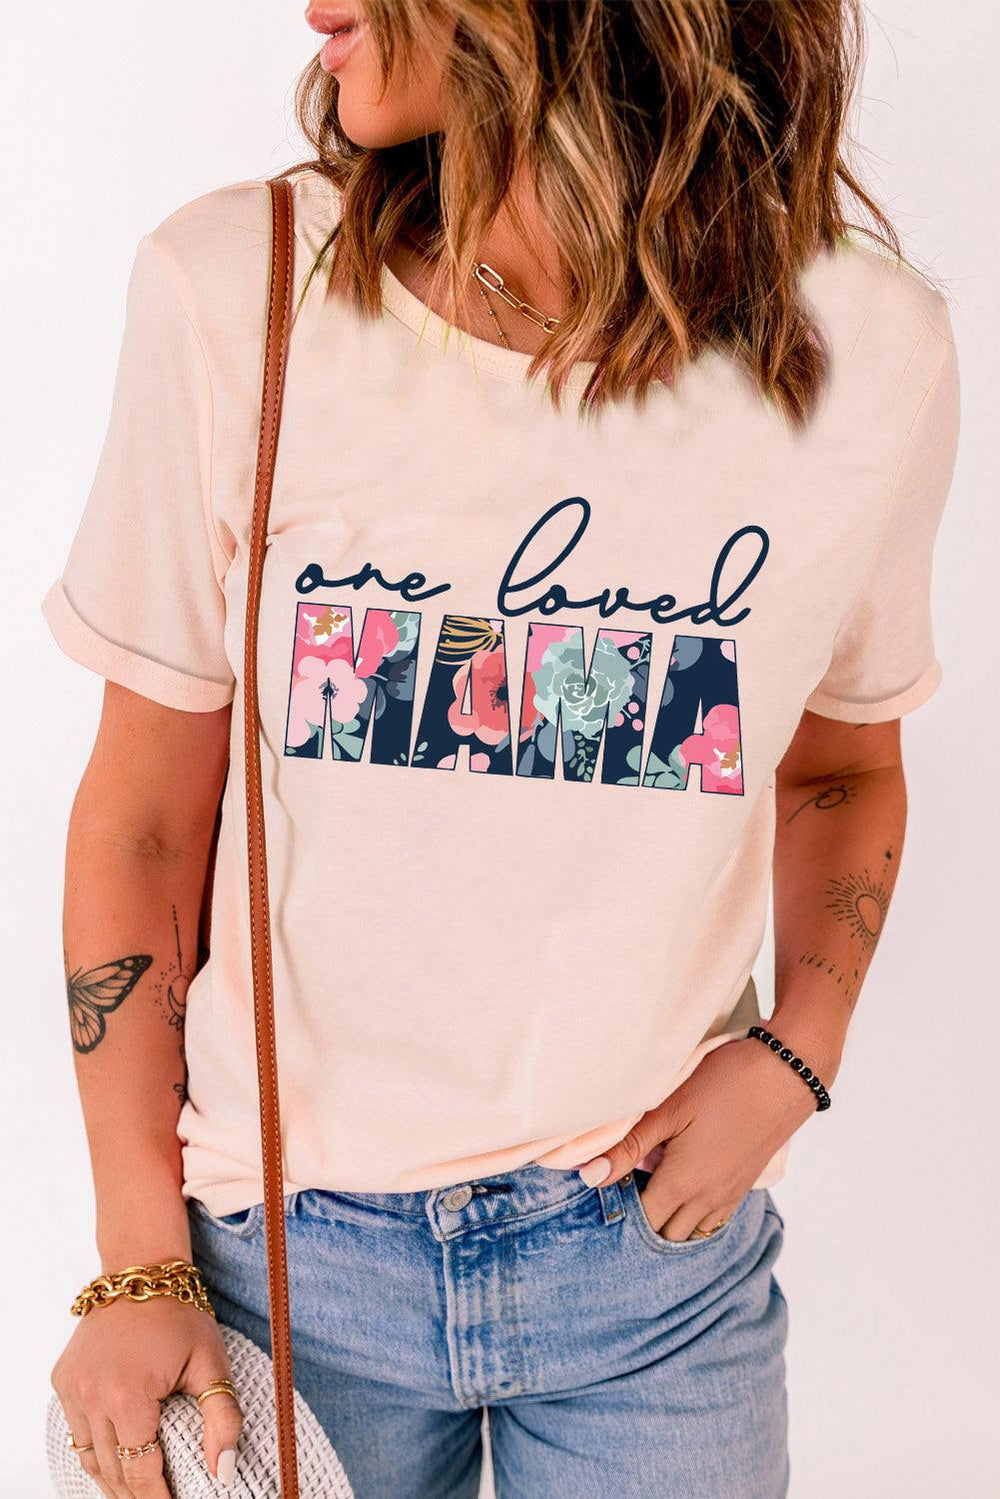 ONE LOVED MAMA Floral Graphic Tee - BELLATRENDZ